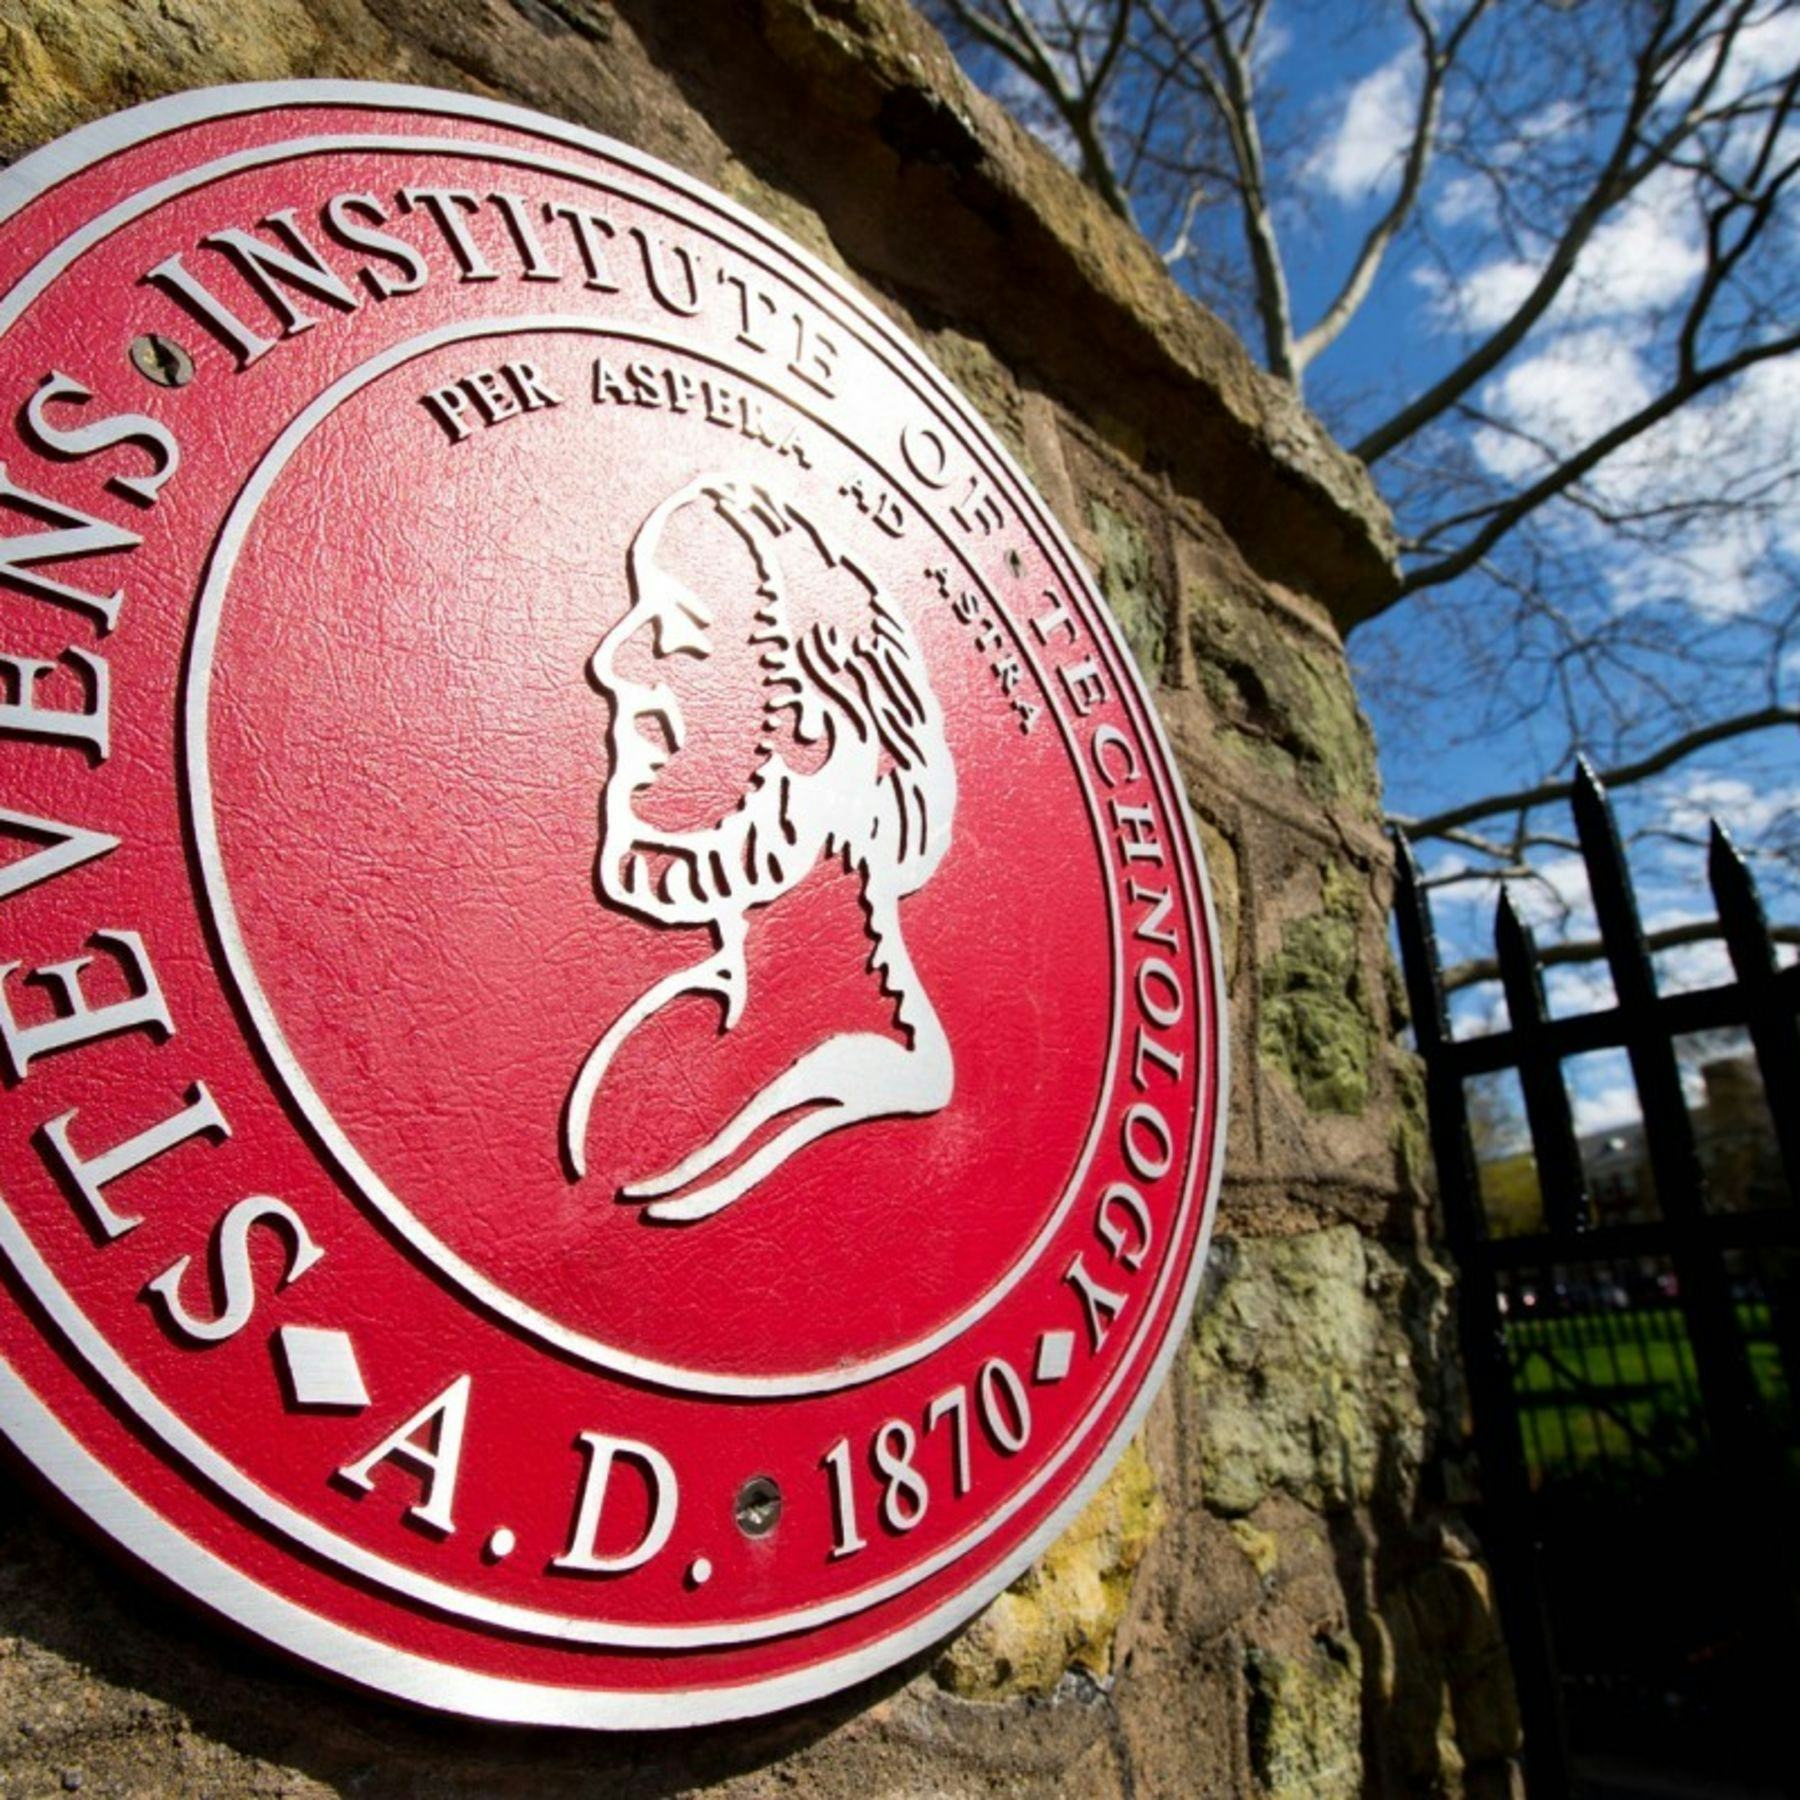 Stevens Institute of Technology Official Seal